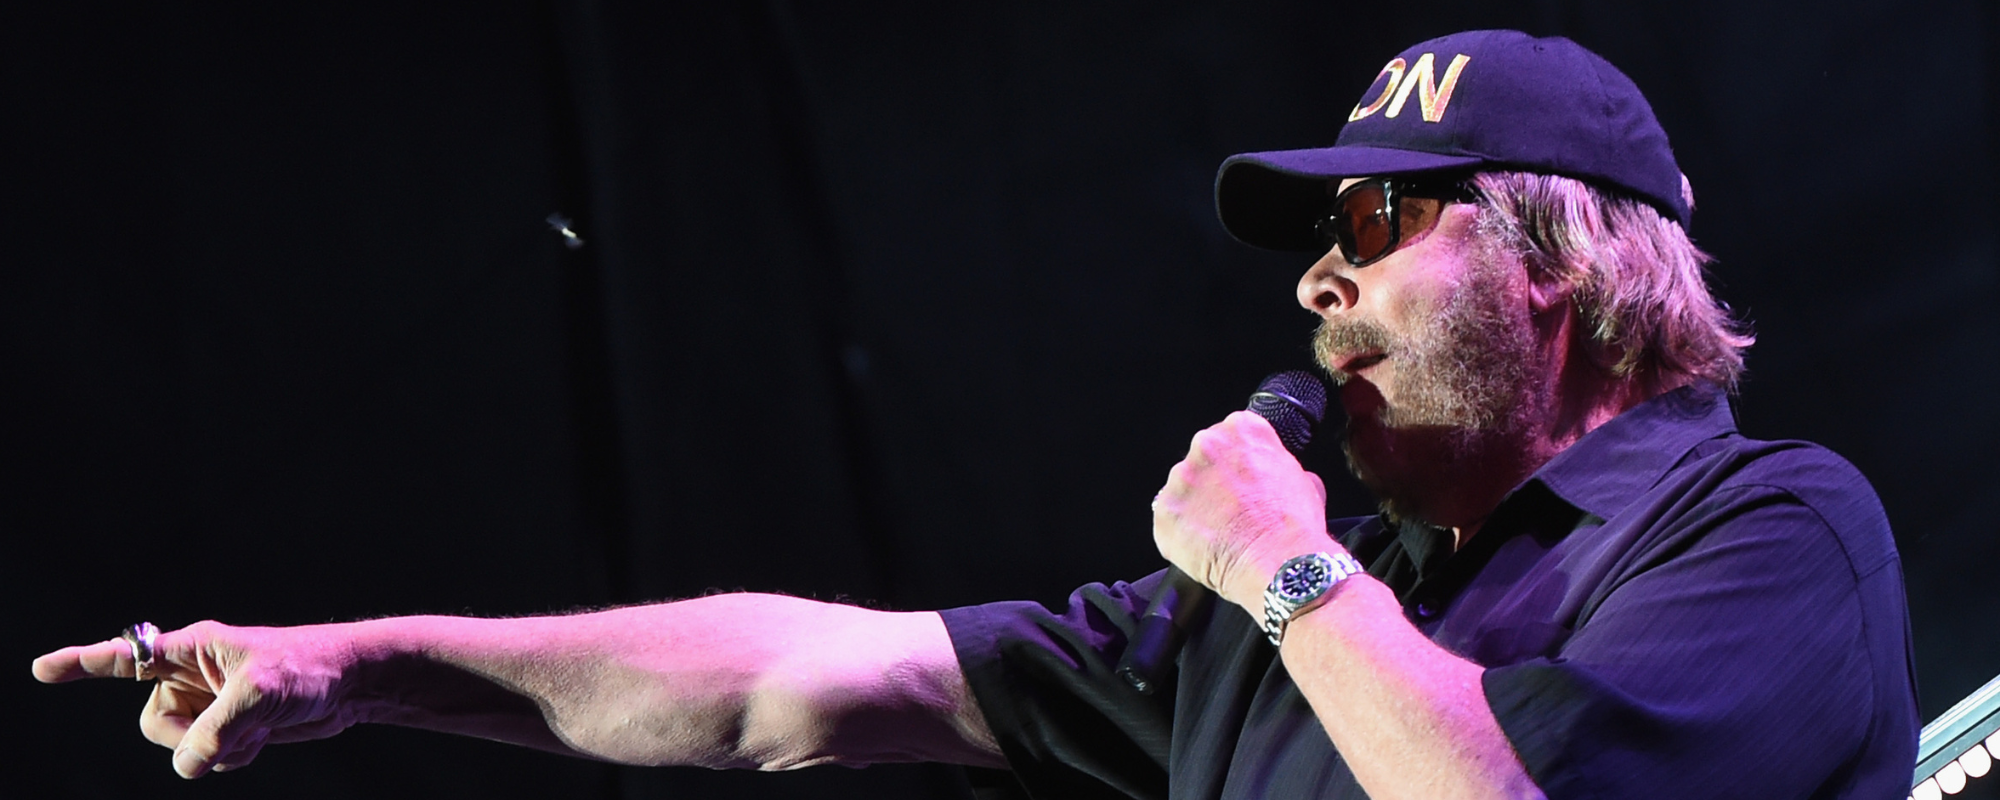 10 of the Best Hank Williams Jr. Quotes